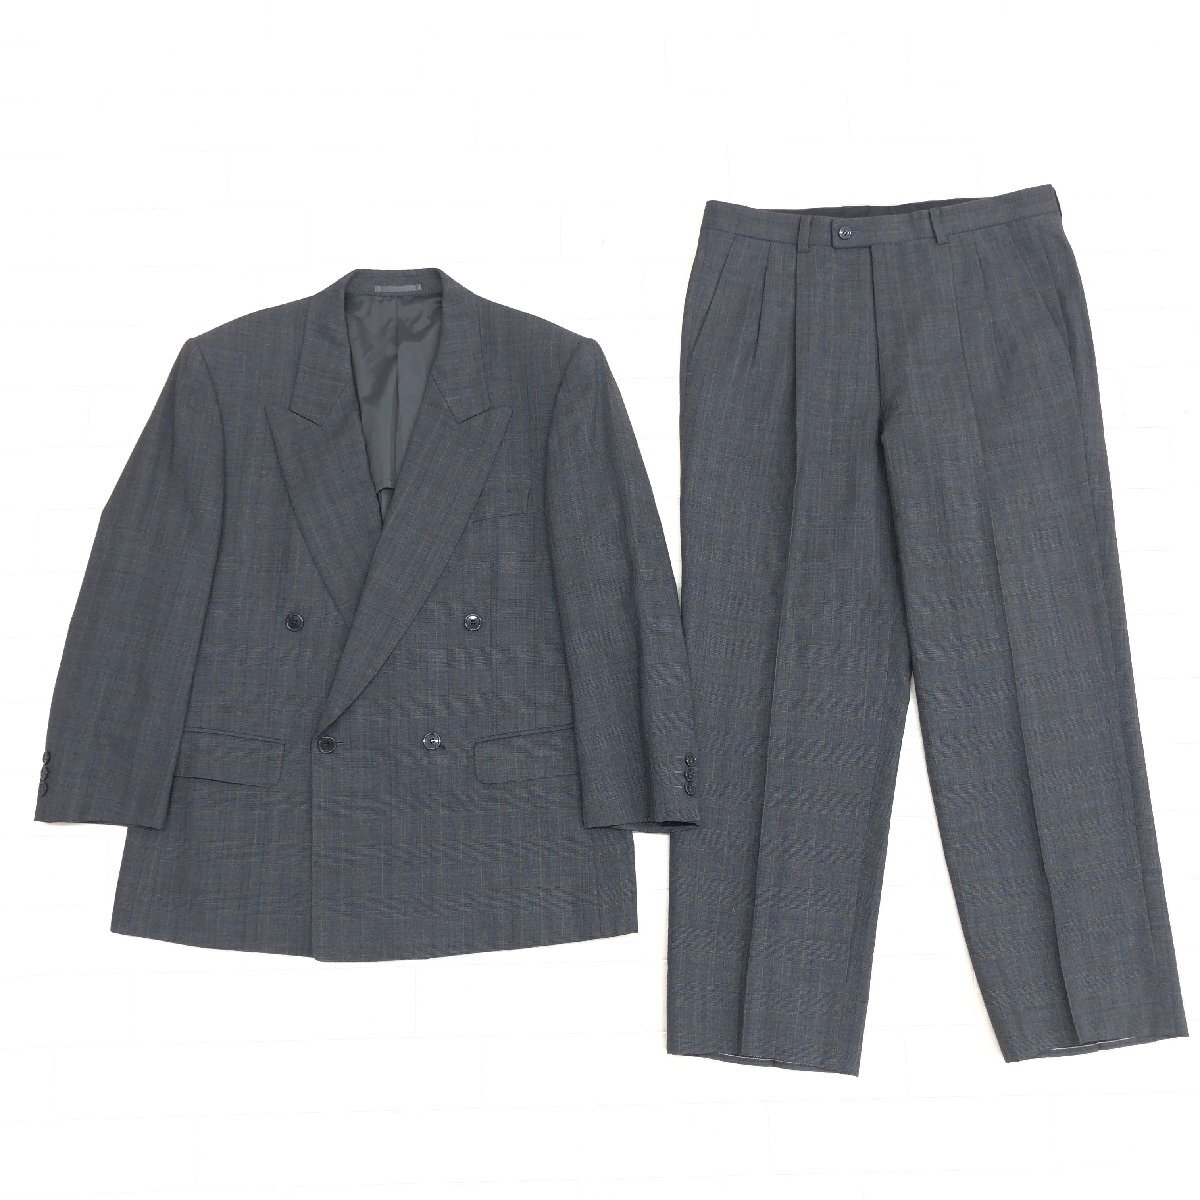 *LANVIN CLASSIQUE Lanvin .. wool woven Glenn check double-breasted suit top and bottom setup 48(L) dark gray jacket pants literary creation shop gentleman 